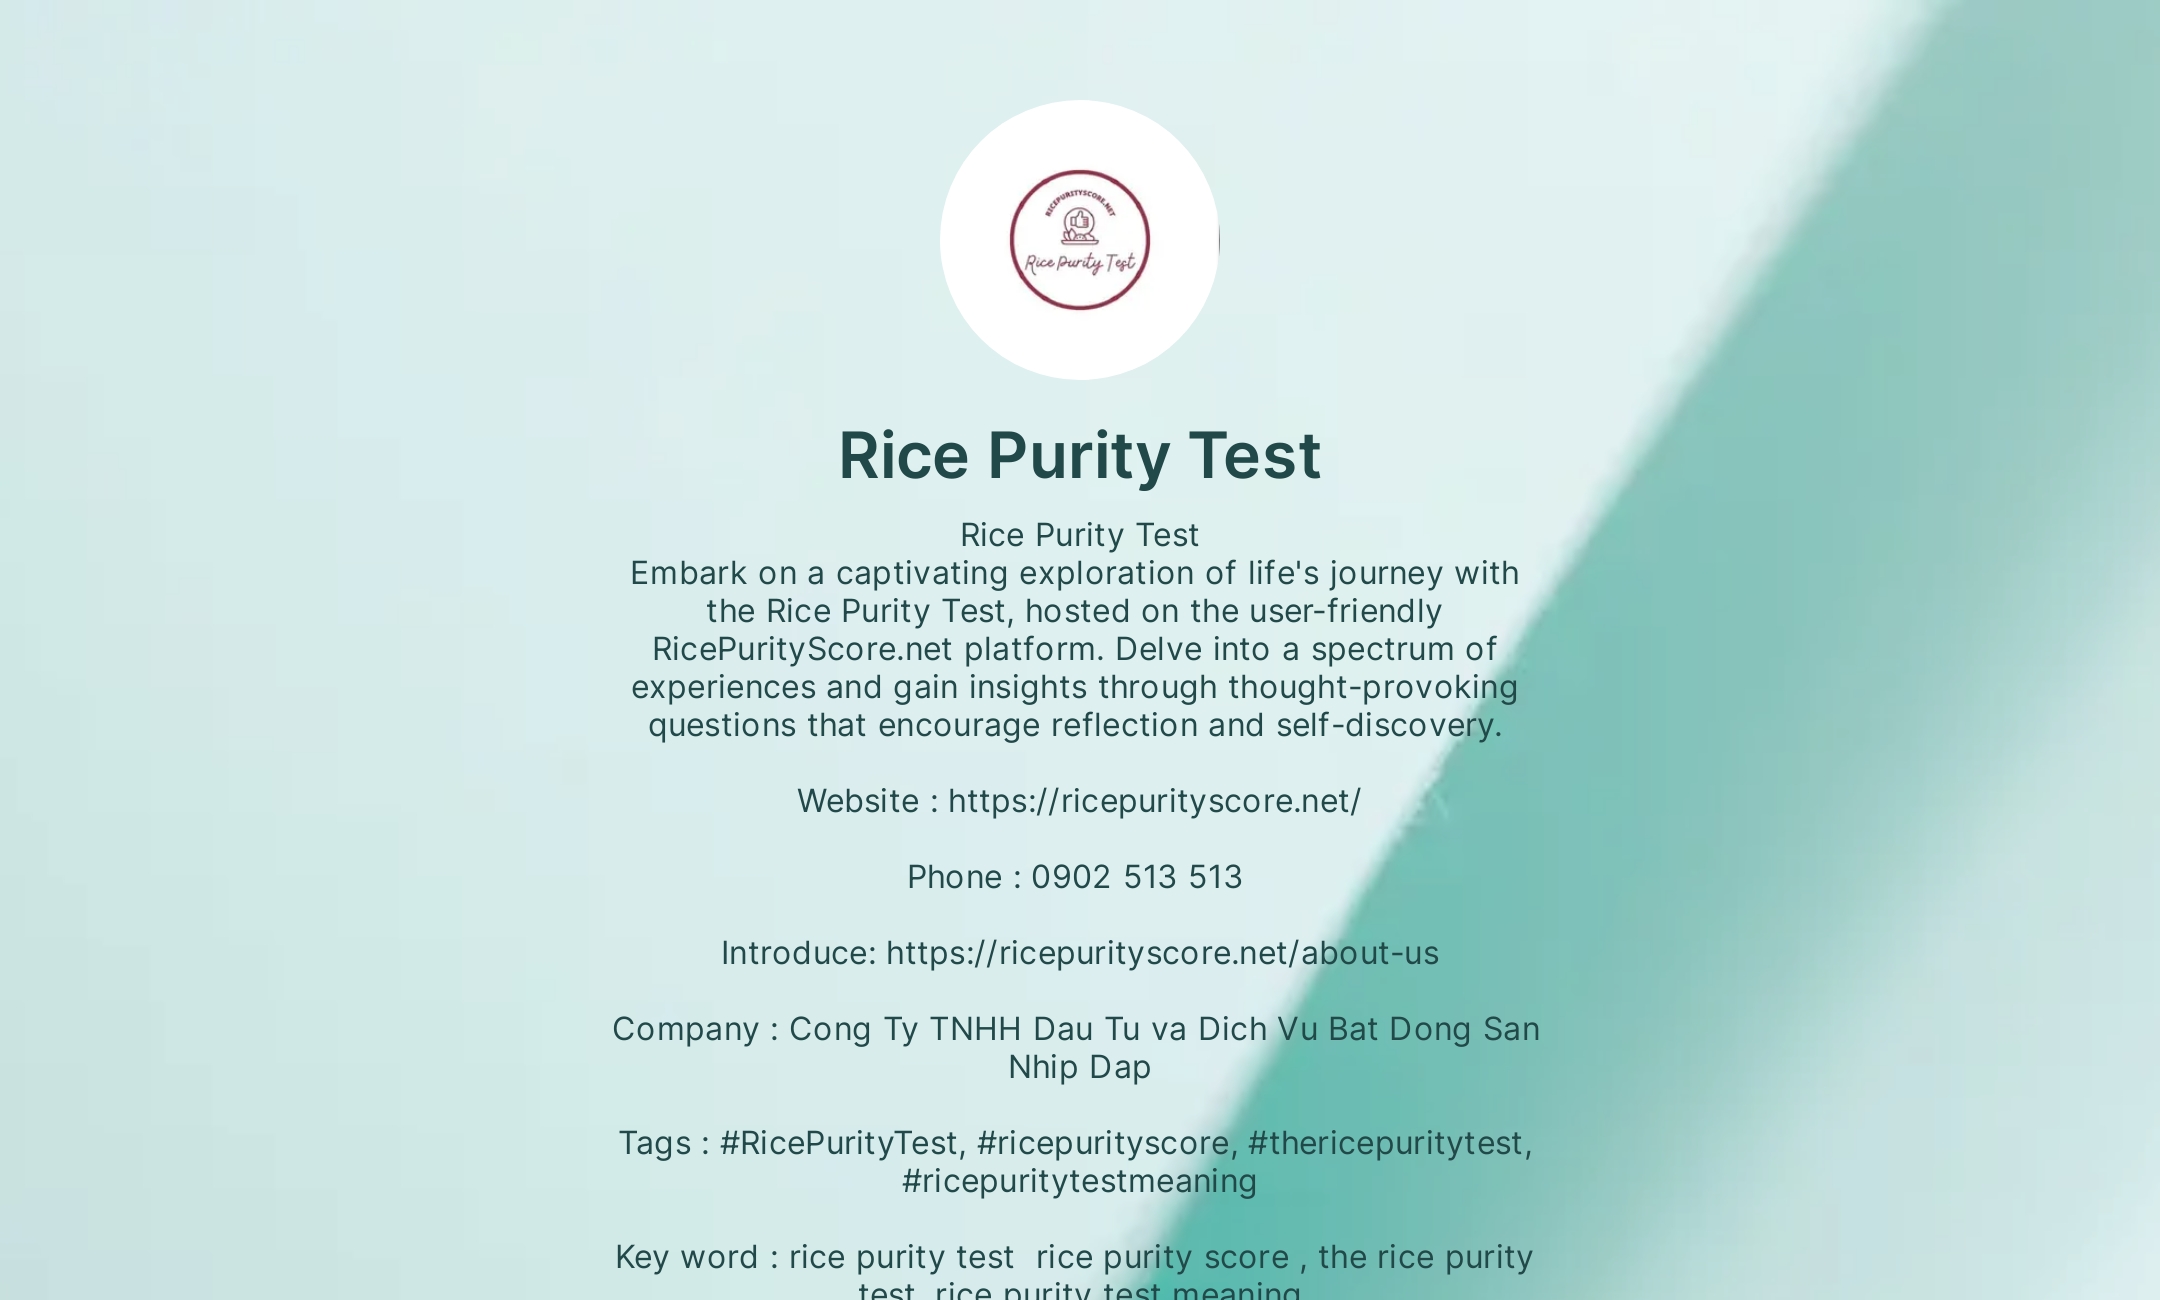 Rice Purity Test's Flowpage